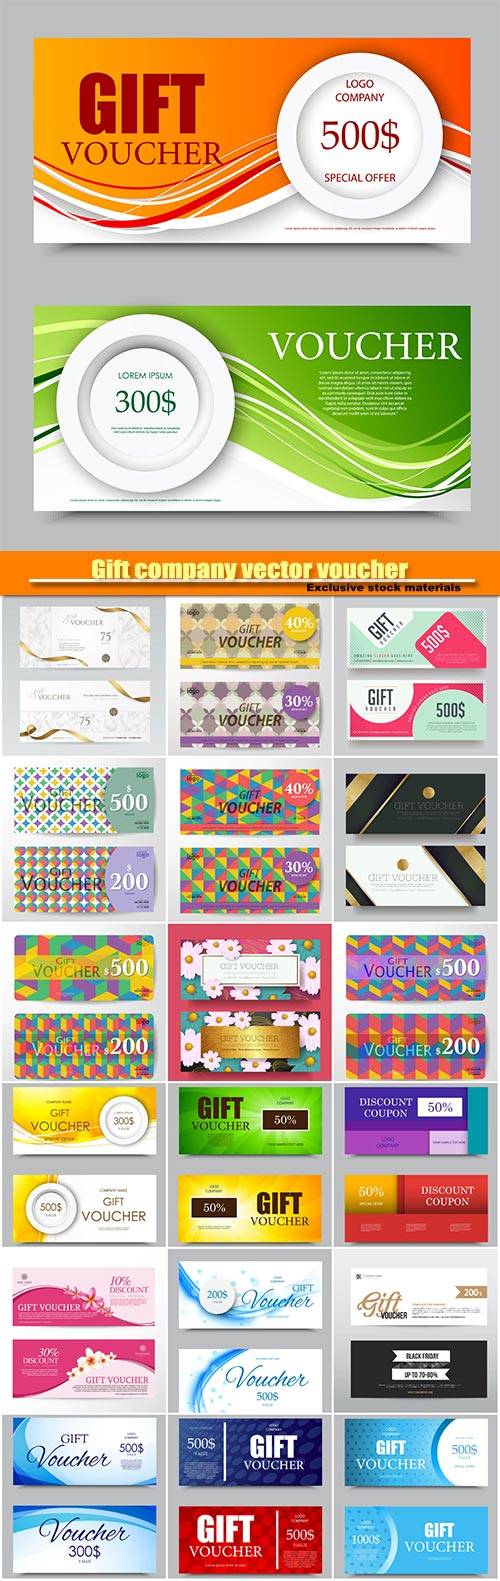 Gift company vector voucher template